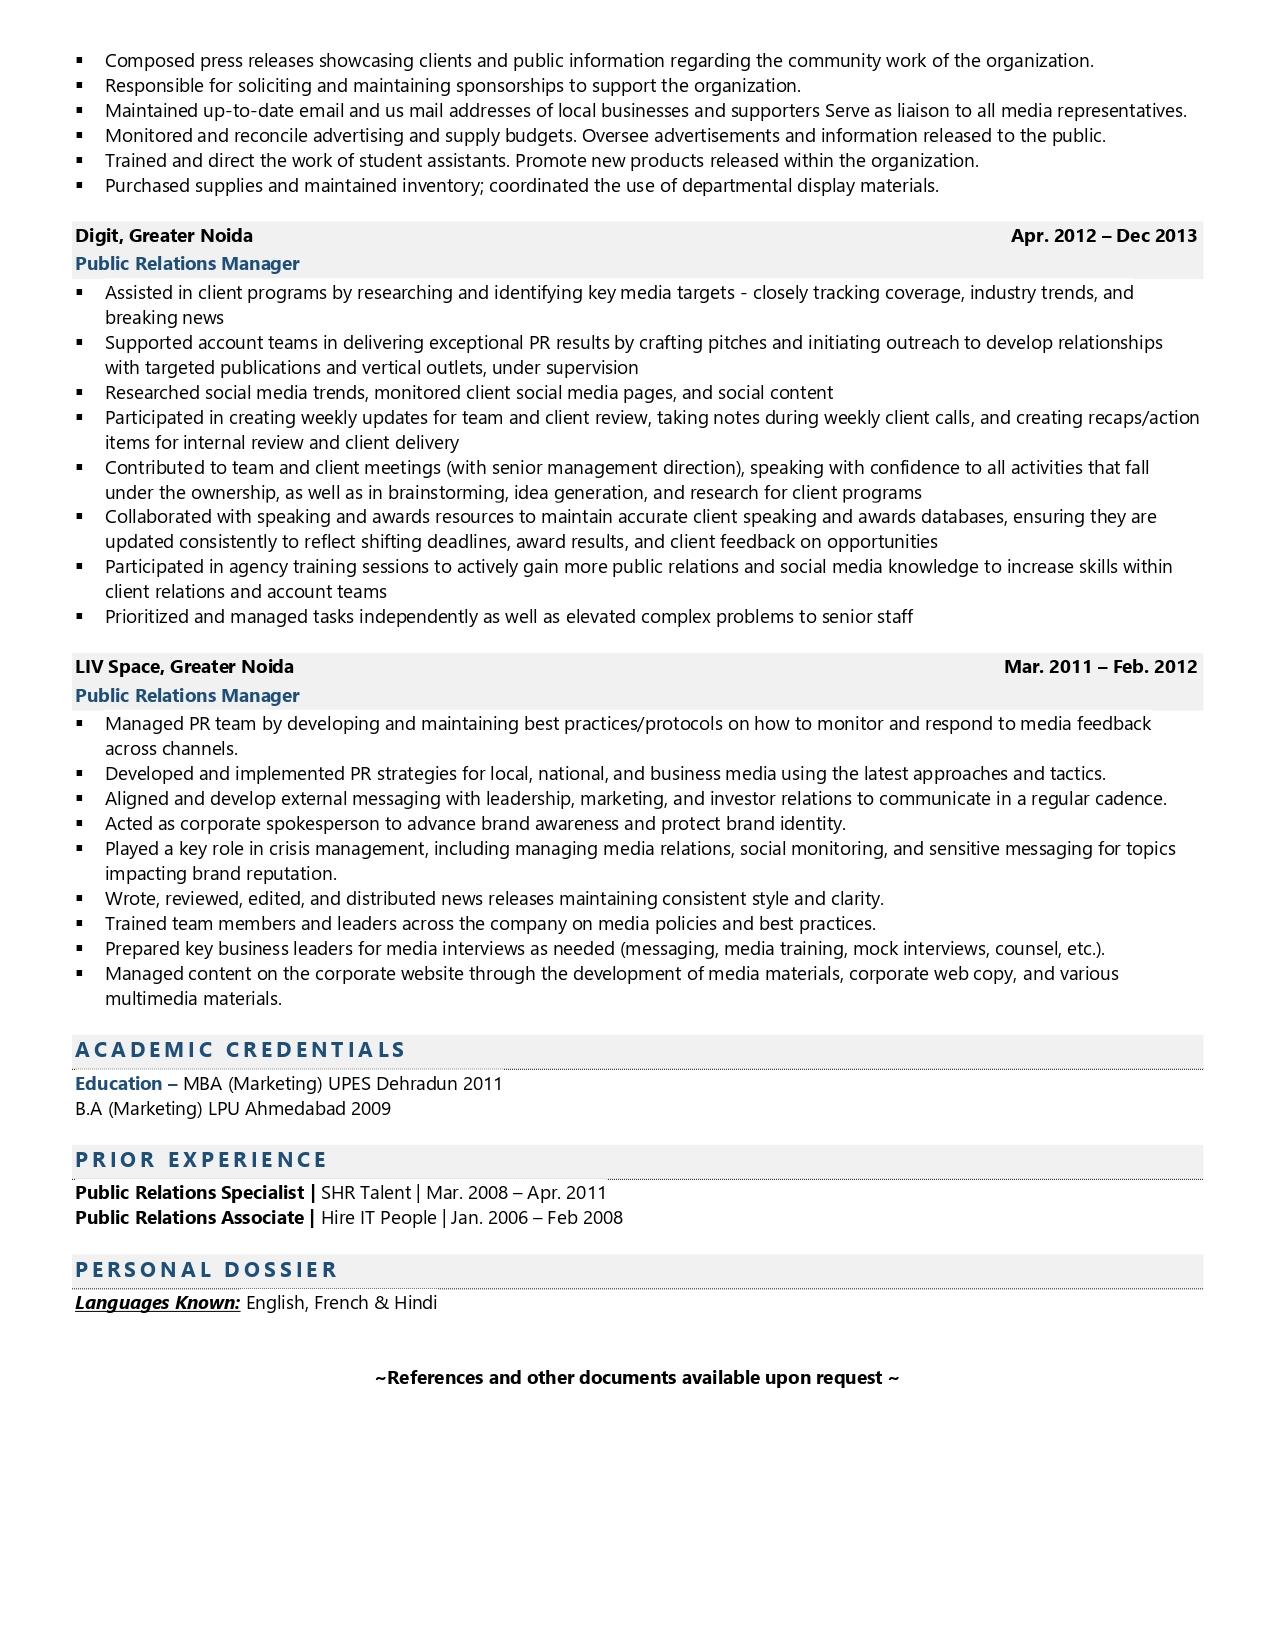 Public Relations Officer - Resume Example & Template